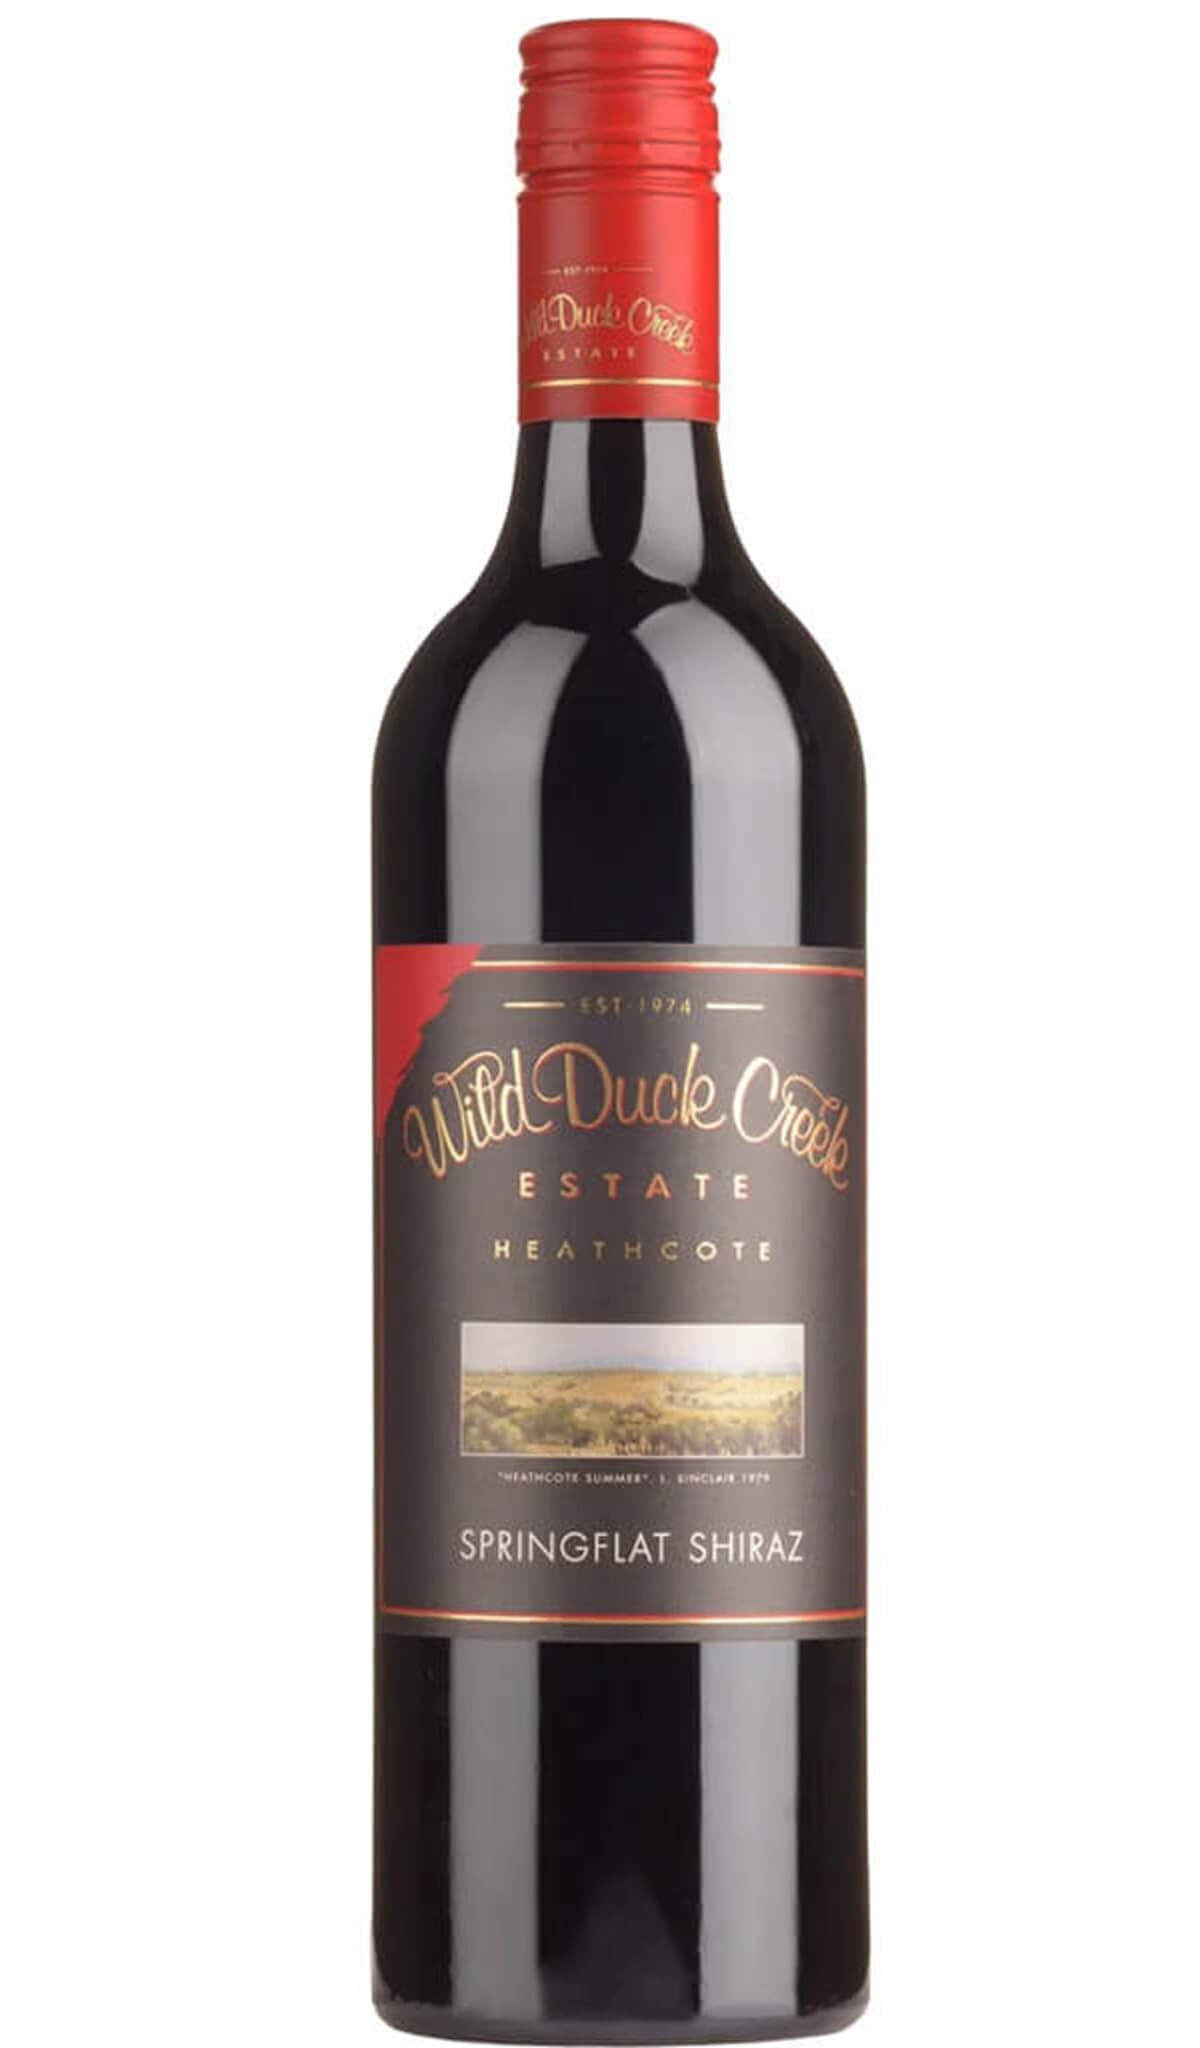 Find out more or buy Wild Duck Creek Springflat Shiraz 2021 (Heathcote) online at Wine Sellers Direct - Australia’s independent liquor specialists.